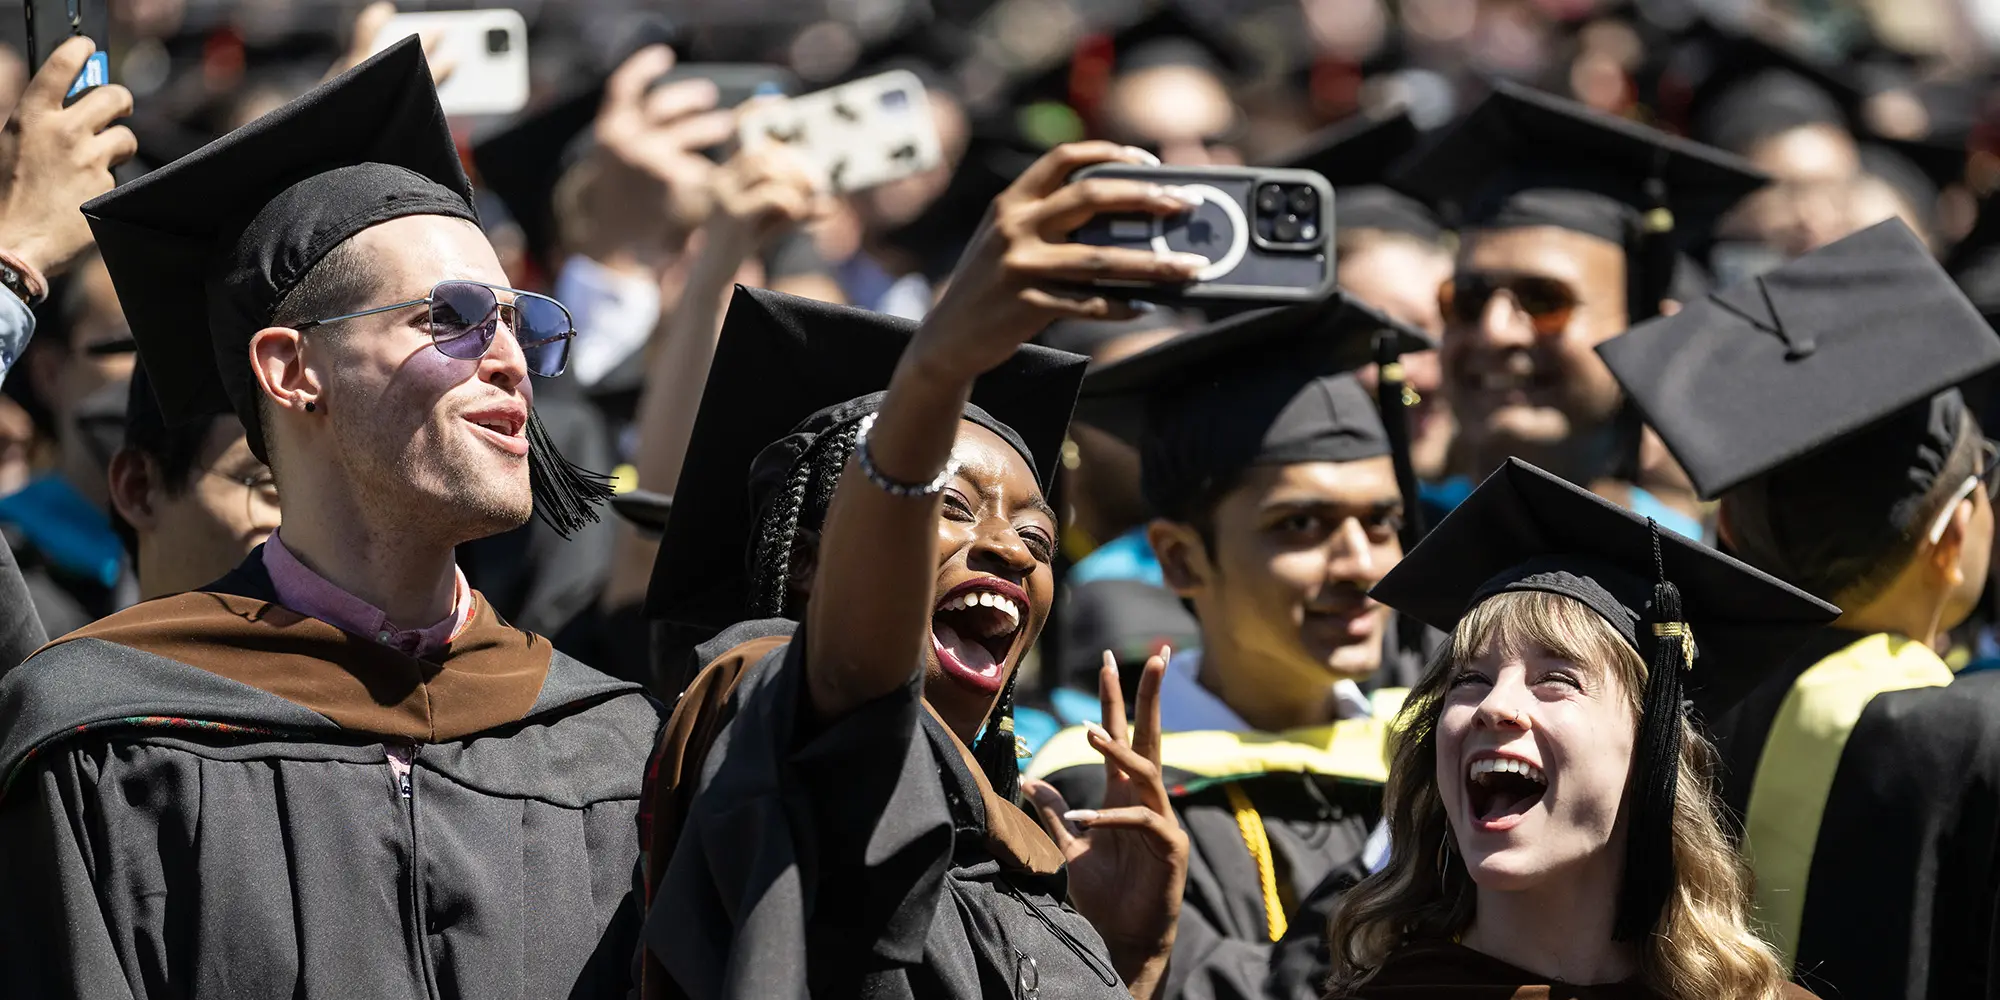 Graduating students celebrate at Commencement.